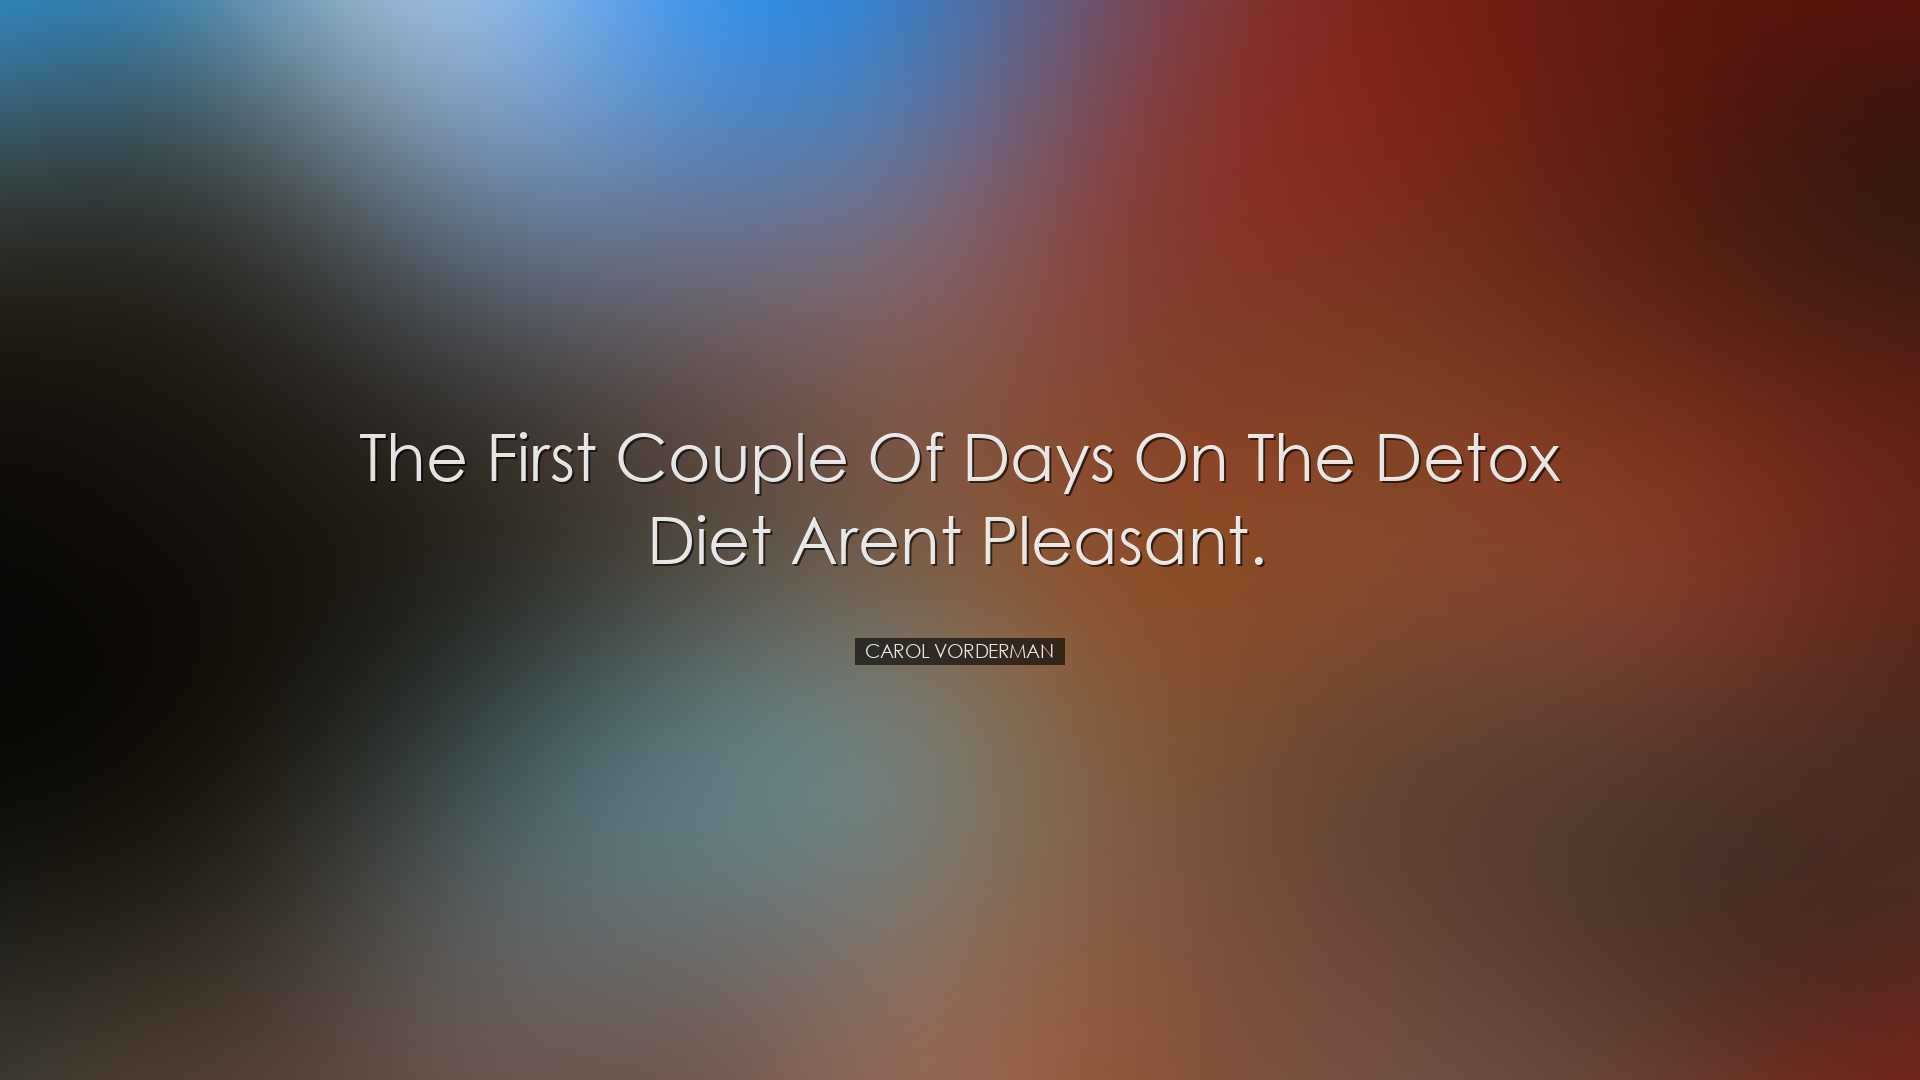 The first couple of days on the detox diet arent pleasant. - Carol